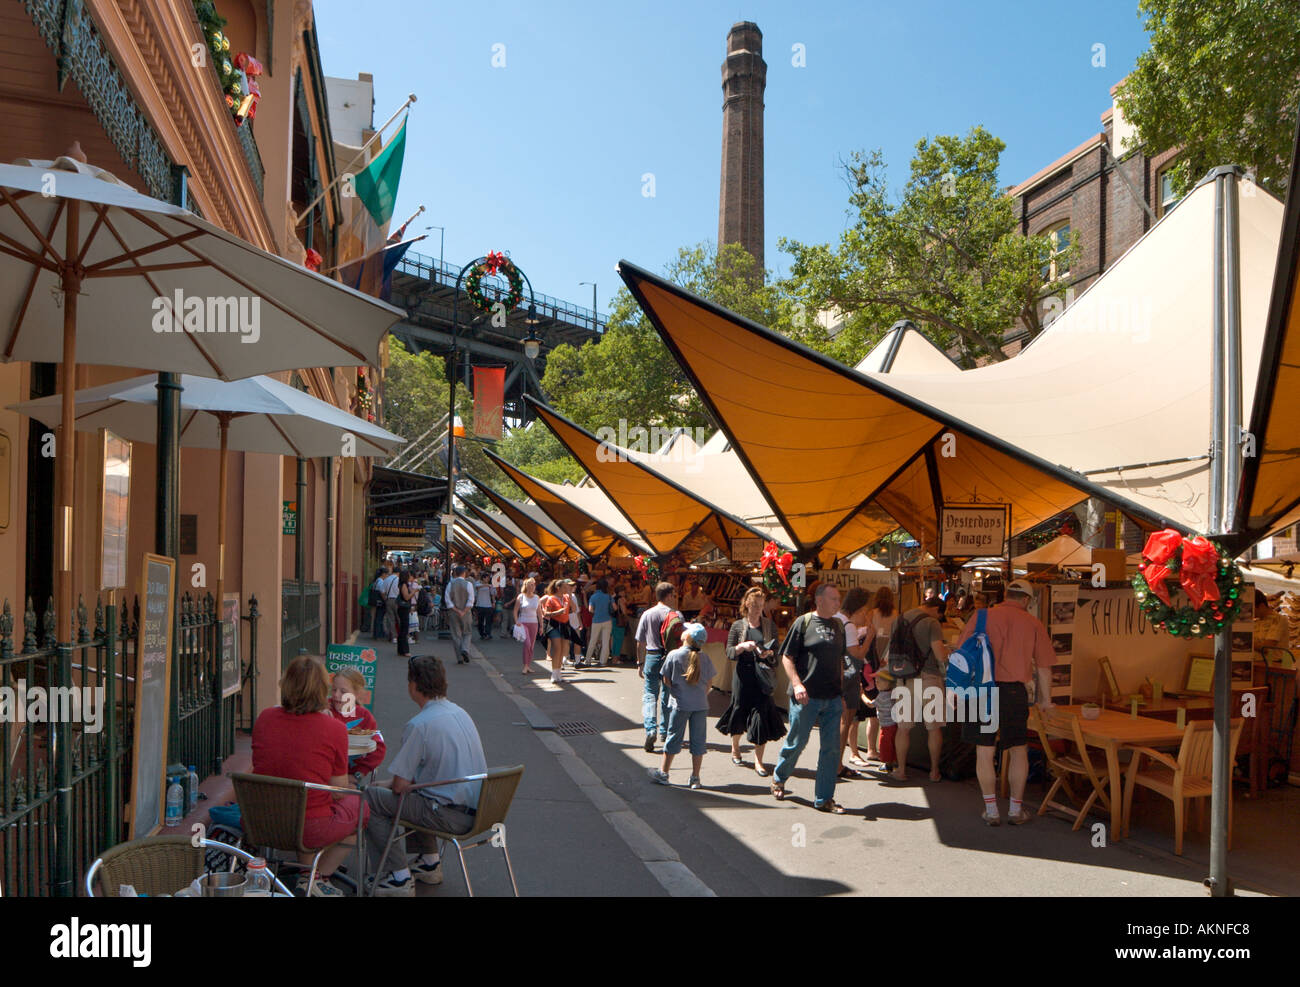 Sunday Market on George Street in The Rocks historic district, Sydney, New South Wales, Australia Stock Photo